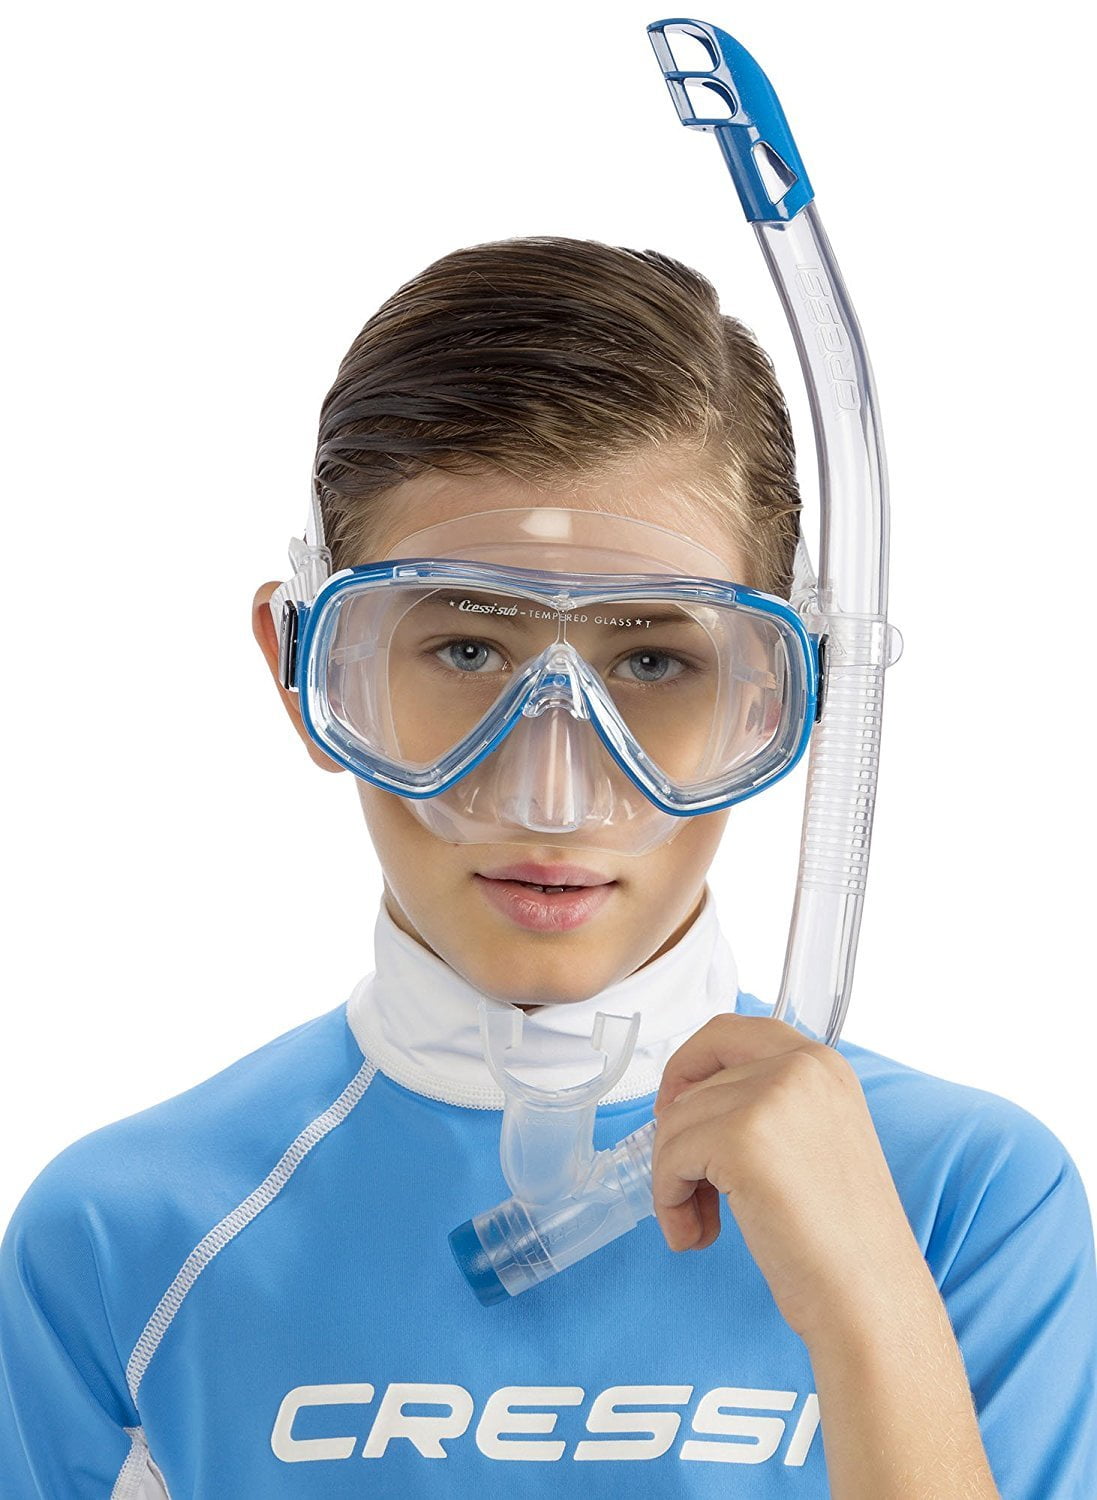 Cressi Marea Junior Kids Snorkeling and Scuba Diving Mask Blue/Blue Colorama Edition - Cressi: 100% Made in Italy Since 1946 